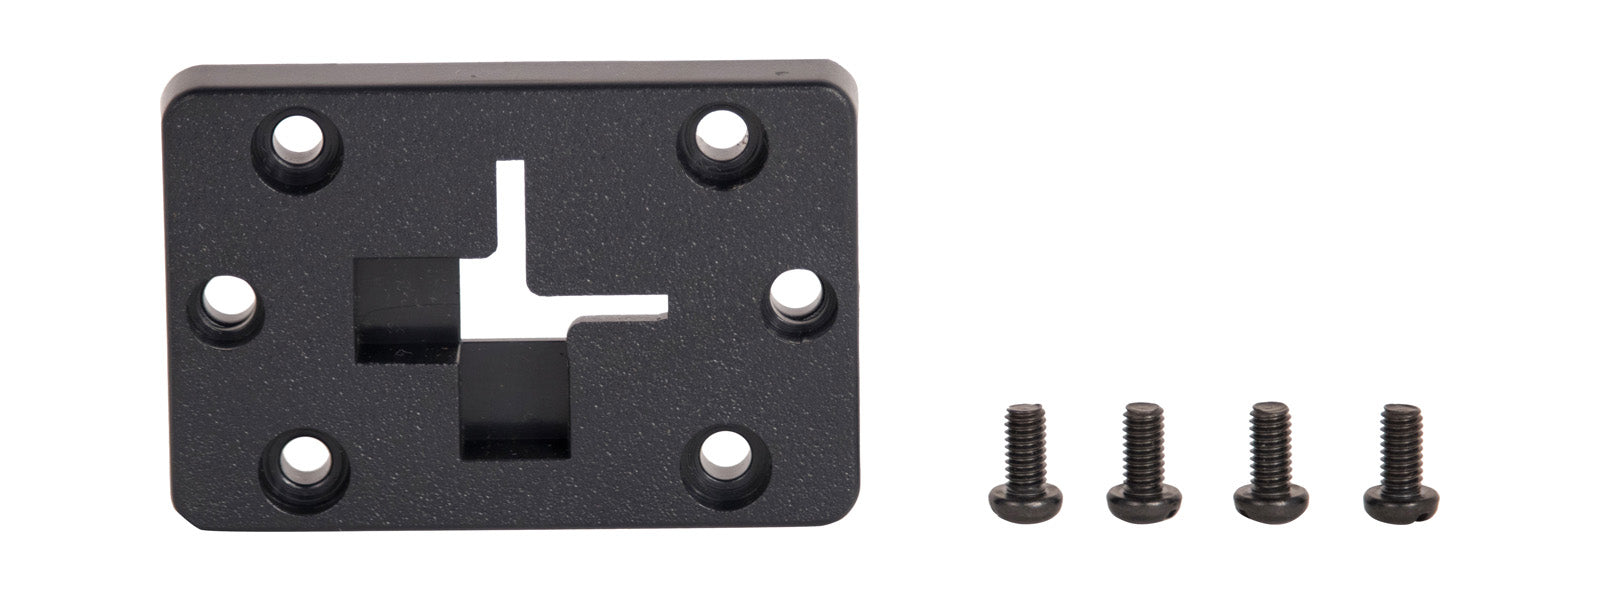 AMPS Plate with Screws